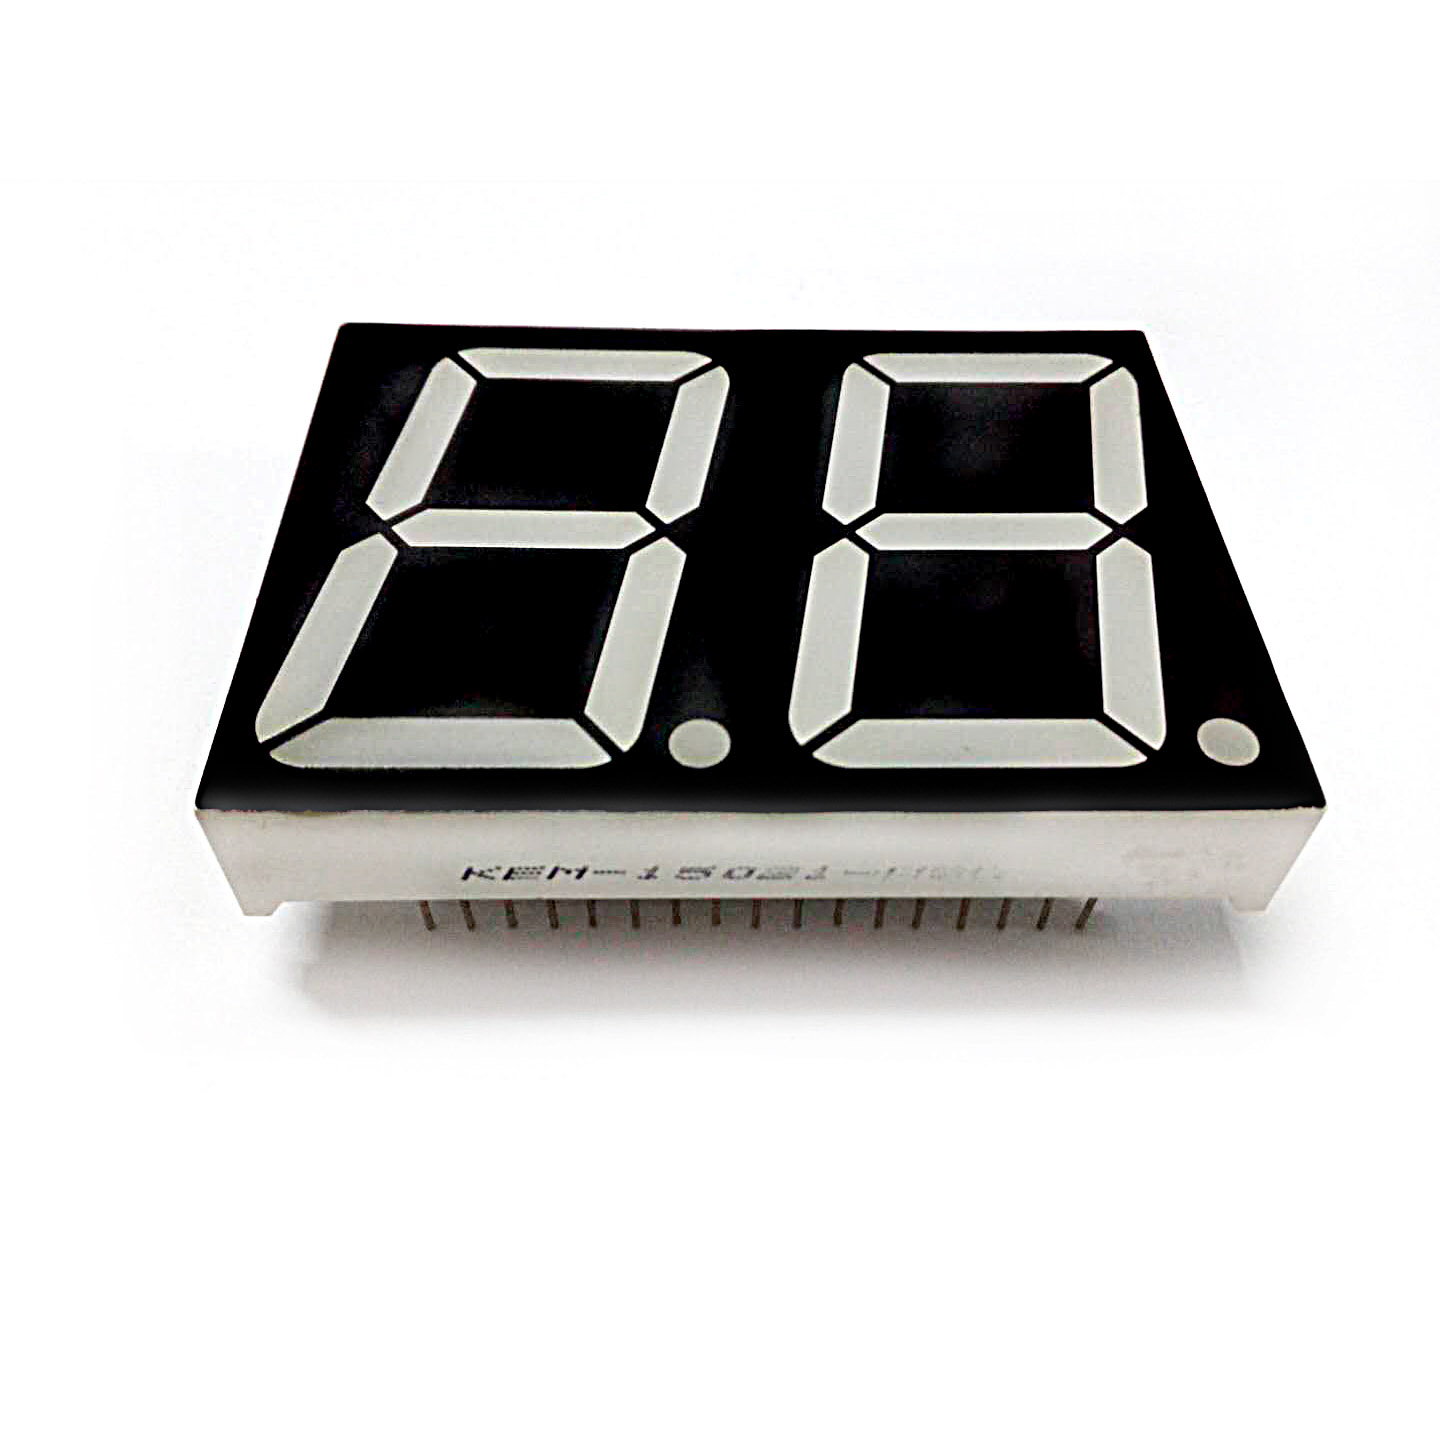 Super Red 1.8 inch 7 segment led display 2 digit Factory